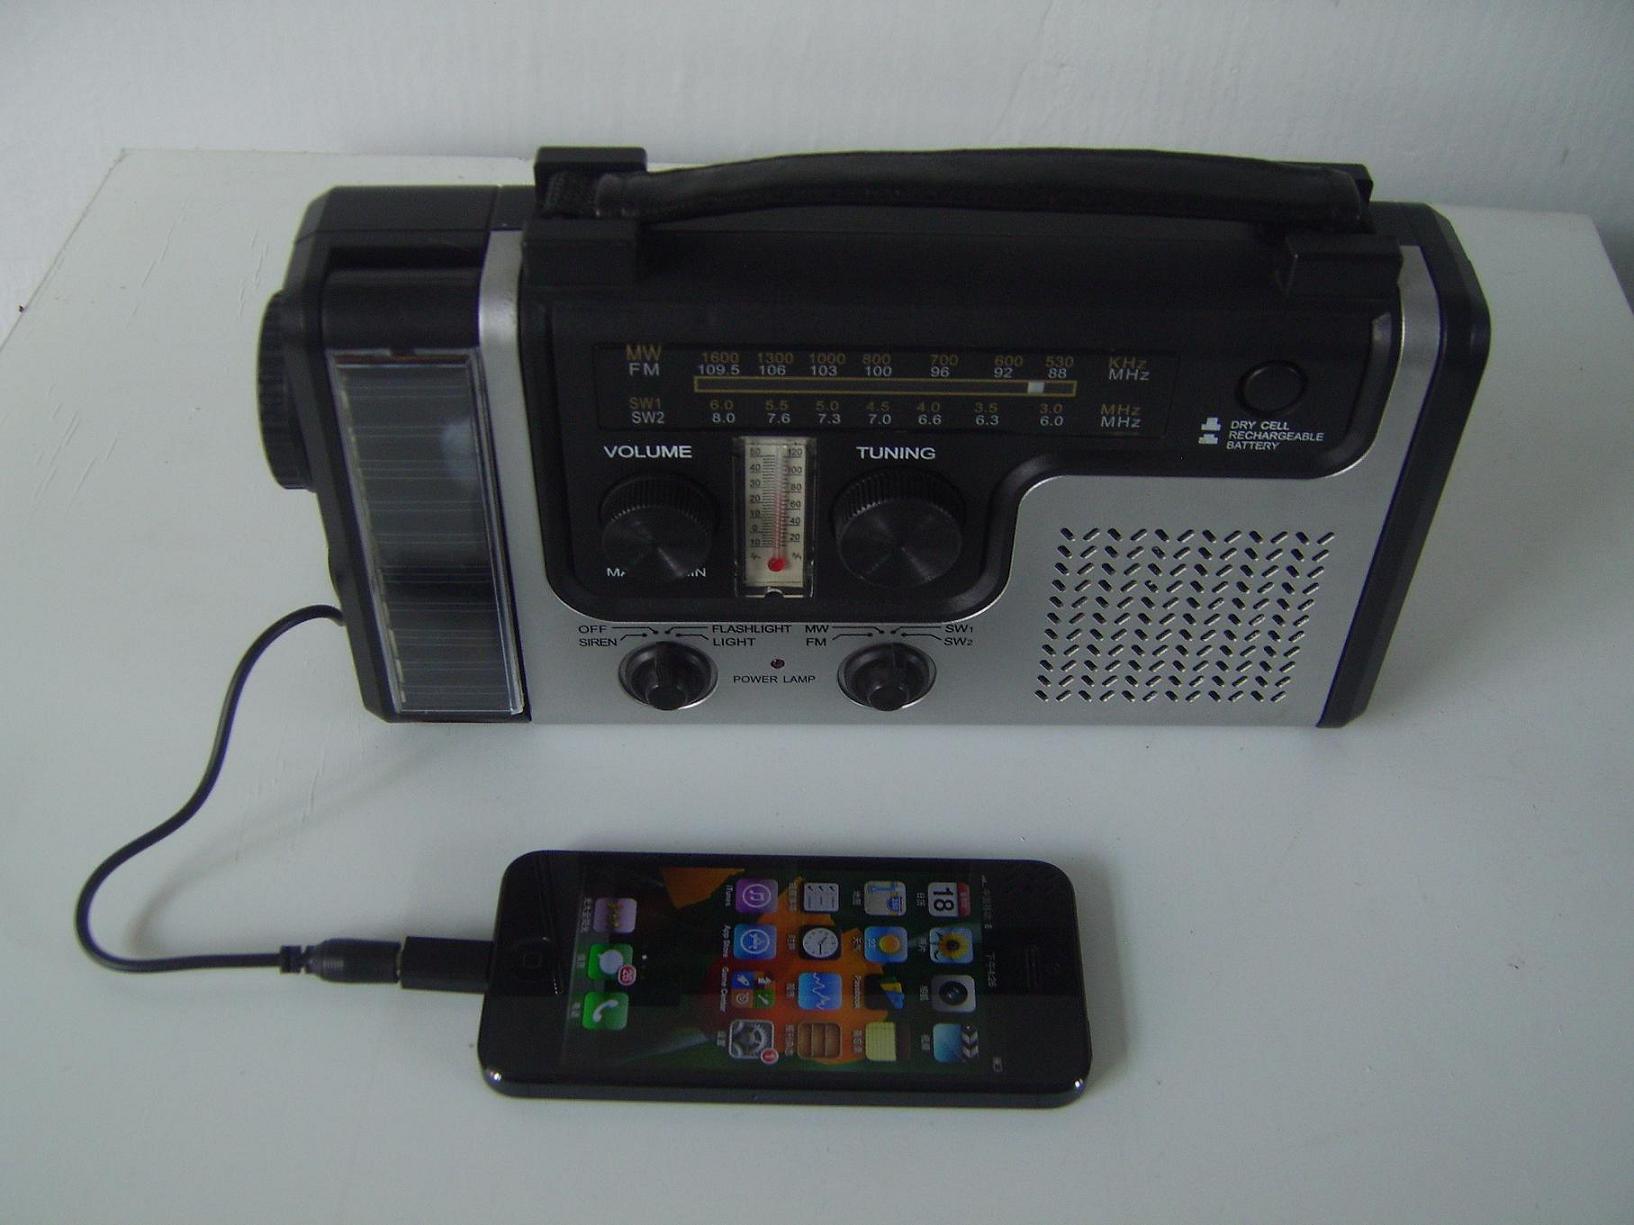 Solar Dynamo Emergency FM Radio with Crank, Phone Charger Survival